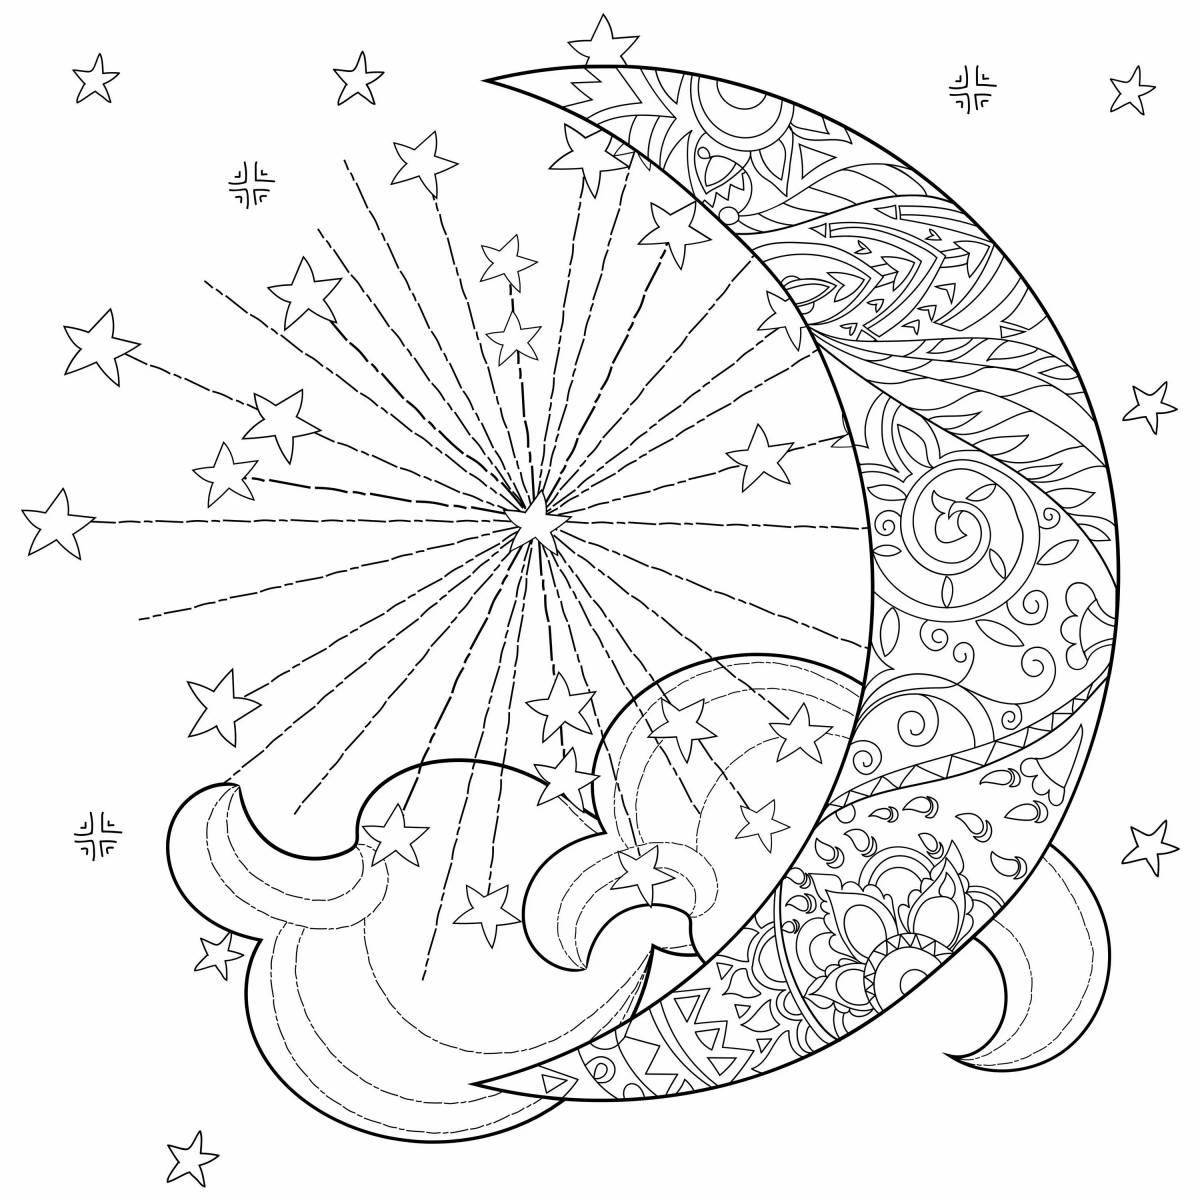 Great night sky coloring book